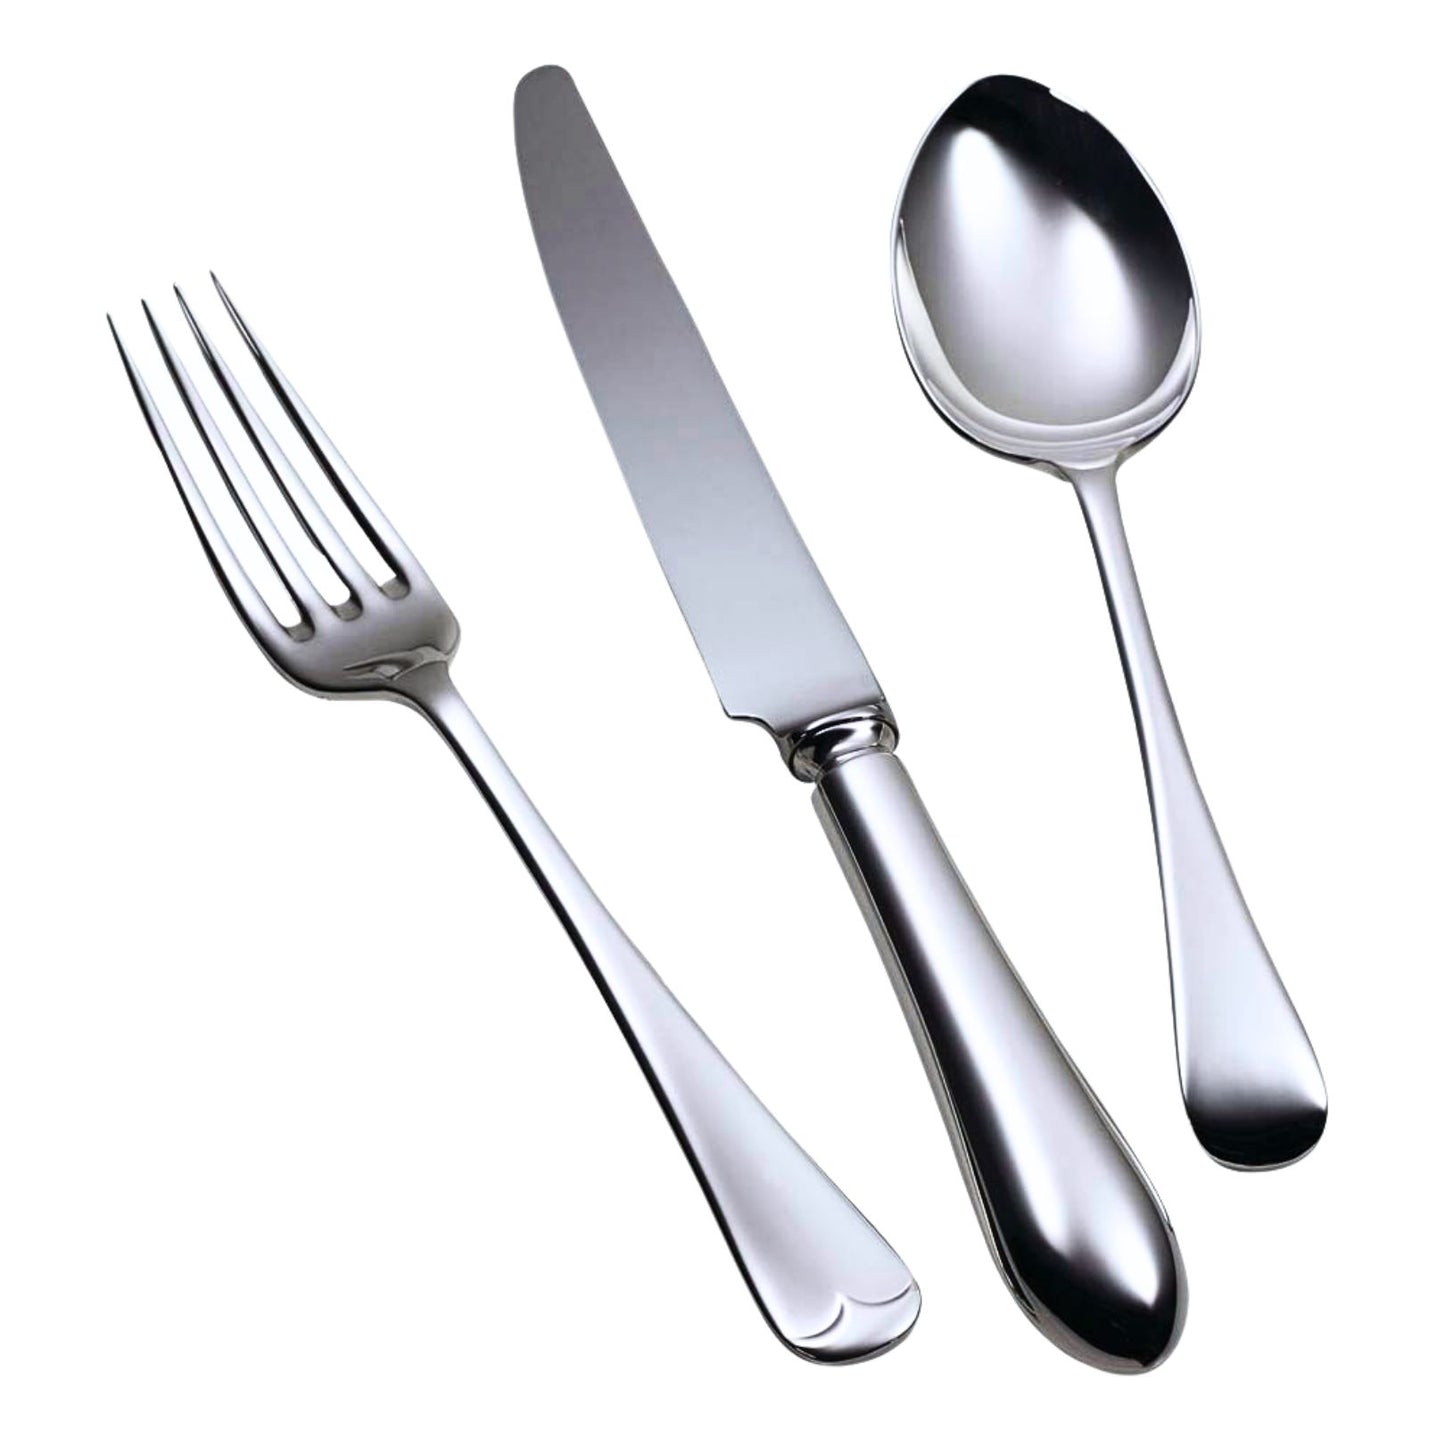 Old English stainless steel flatware cutlery